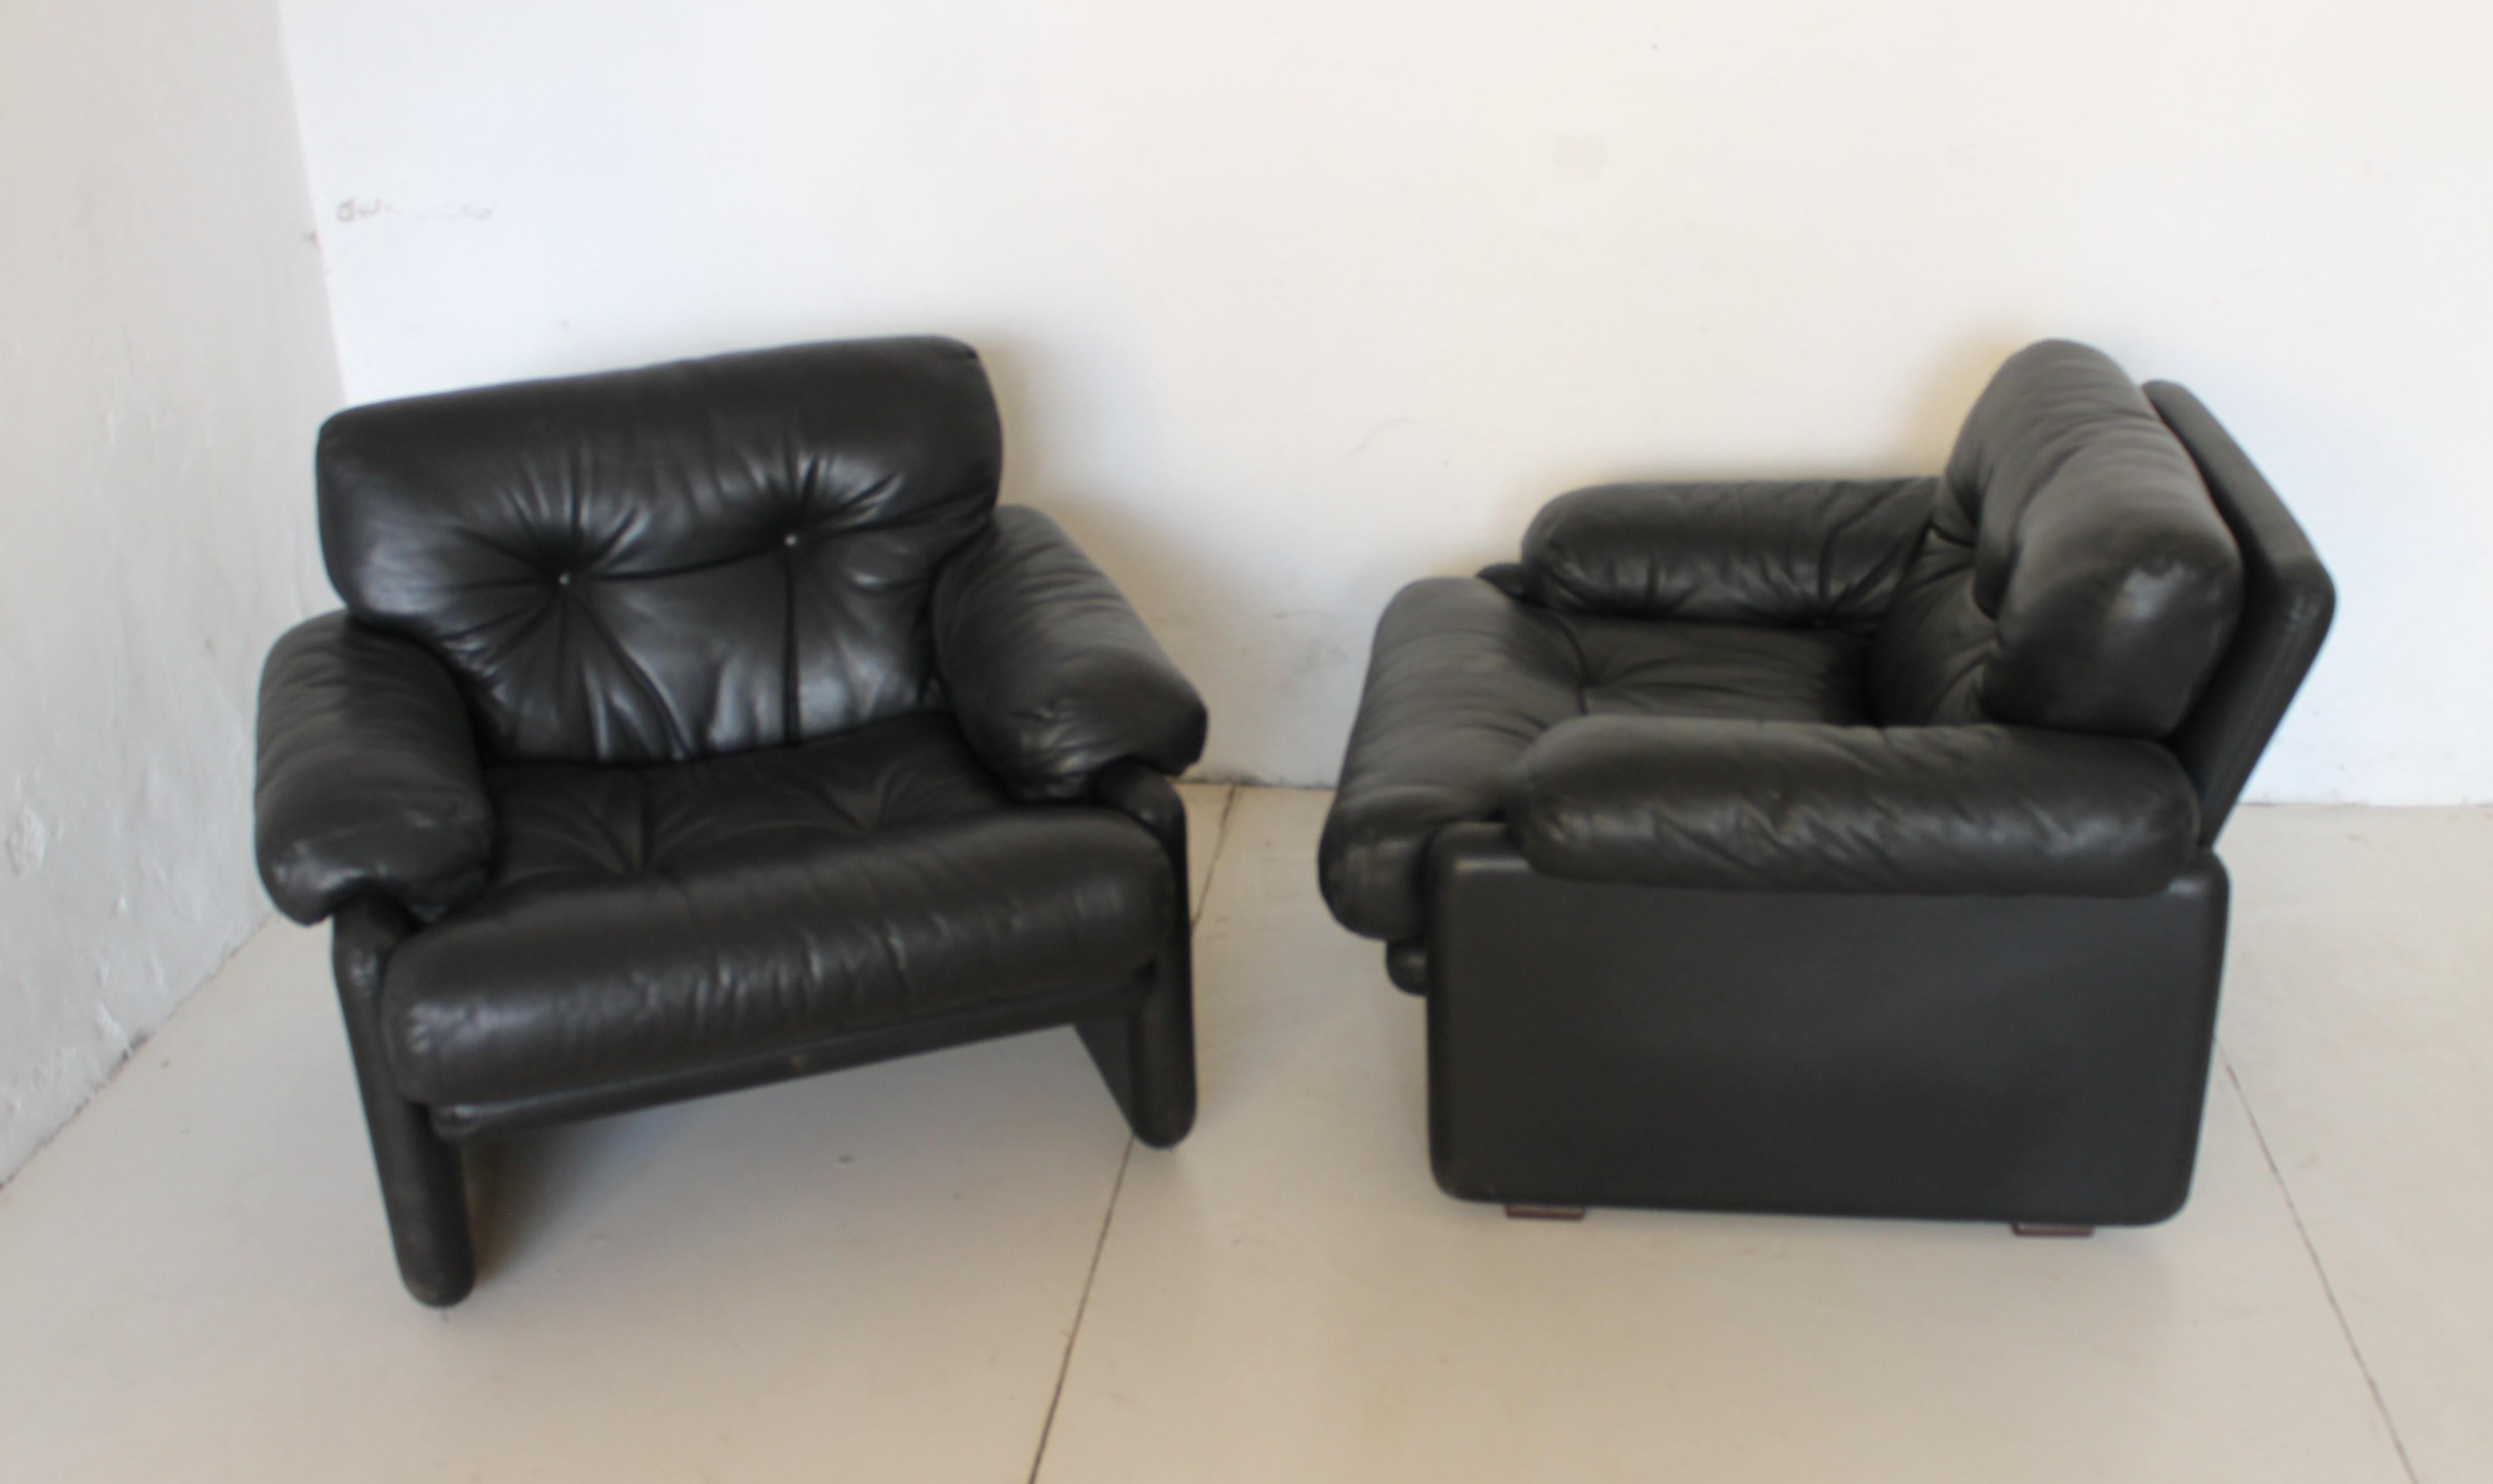 Coronado lounge chairs designed by Tobia Scarpa for B&B Italia. The project is dated 1966. Black leather, great condition.